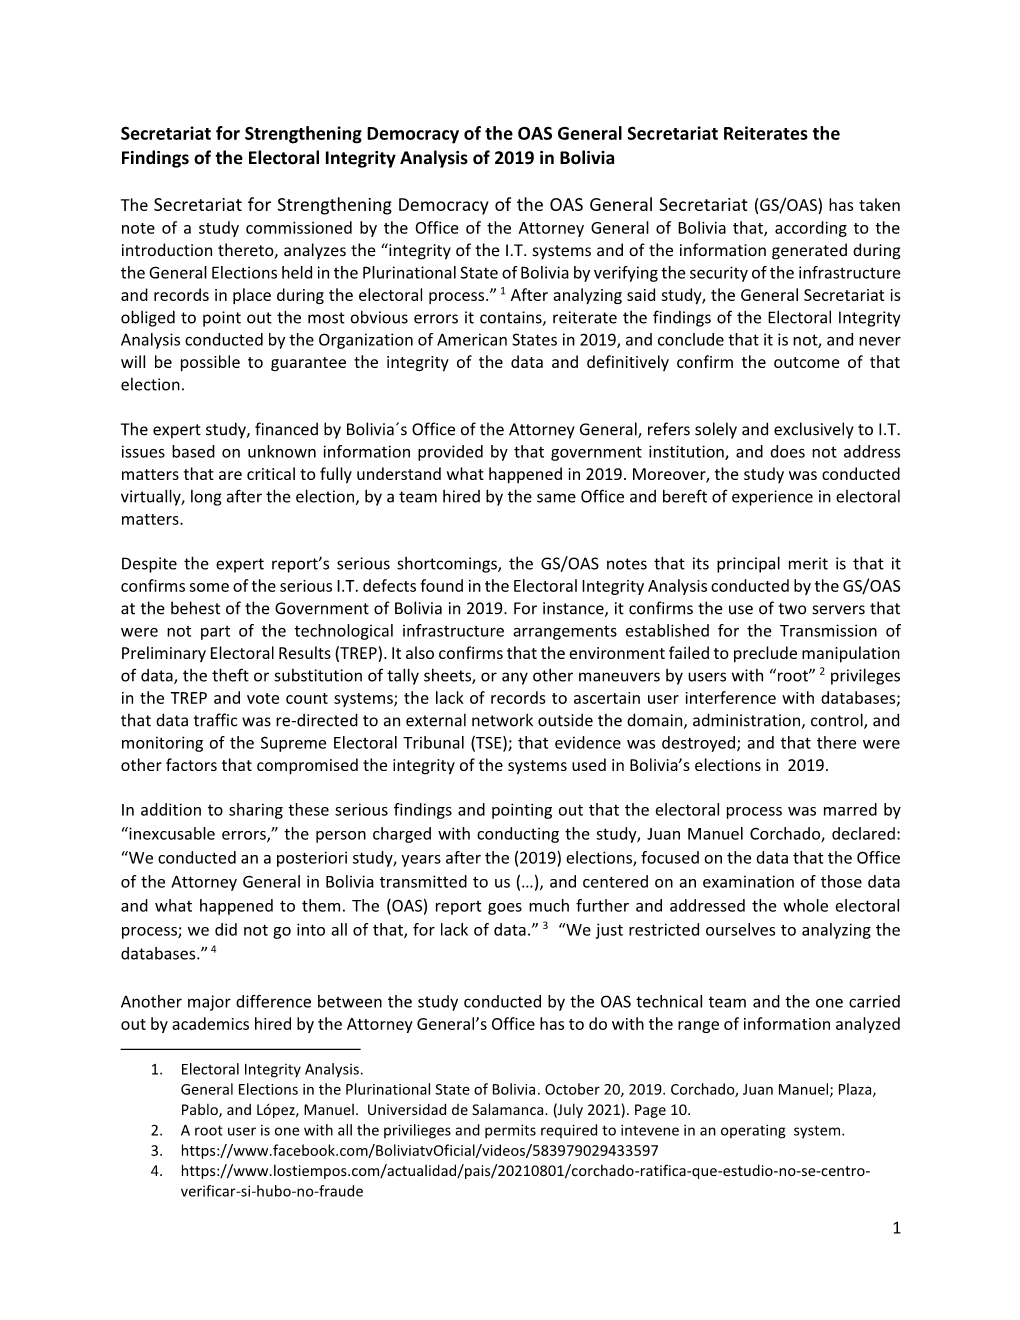 Secretariat for Strengthening Democracy of the OAS General Secretariat Reiterates the Findings of the Electoral Integrity Analysis of 2019 in Bolivia